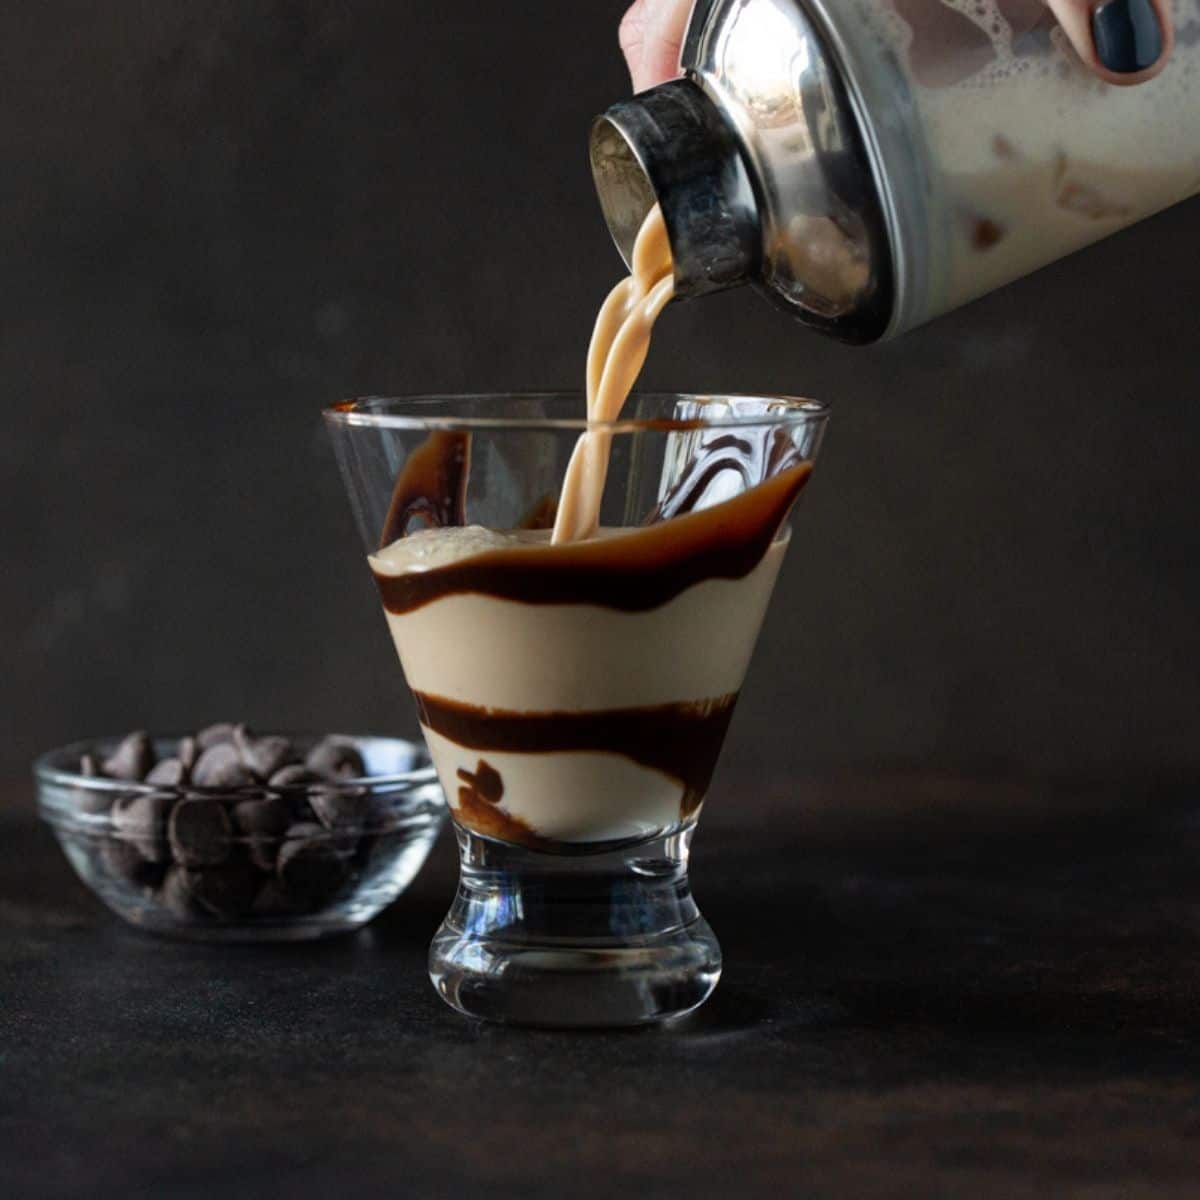 Martini glass filled with chocolate drink and swirl.